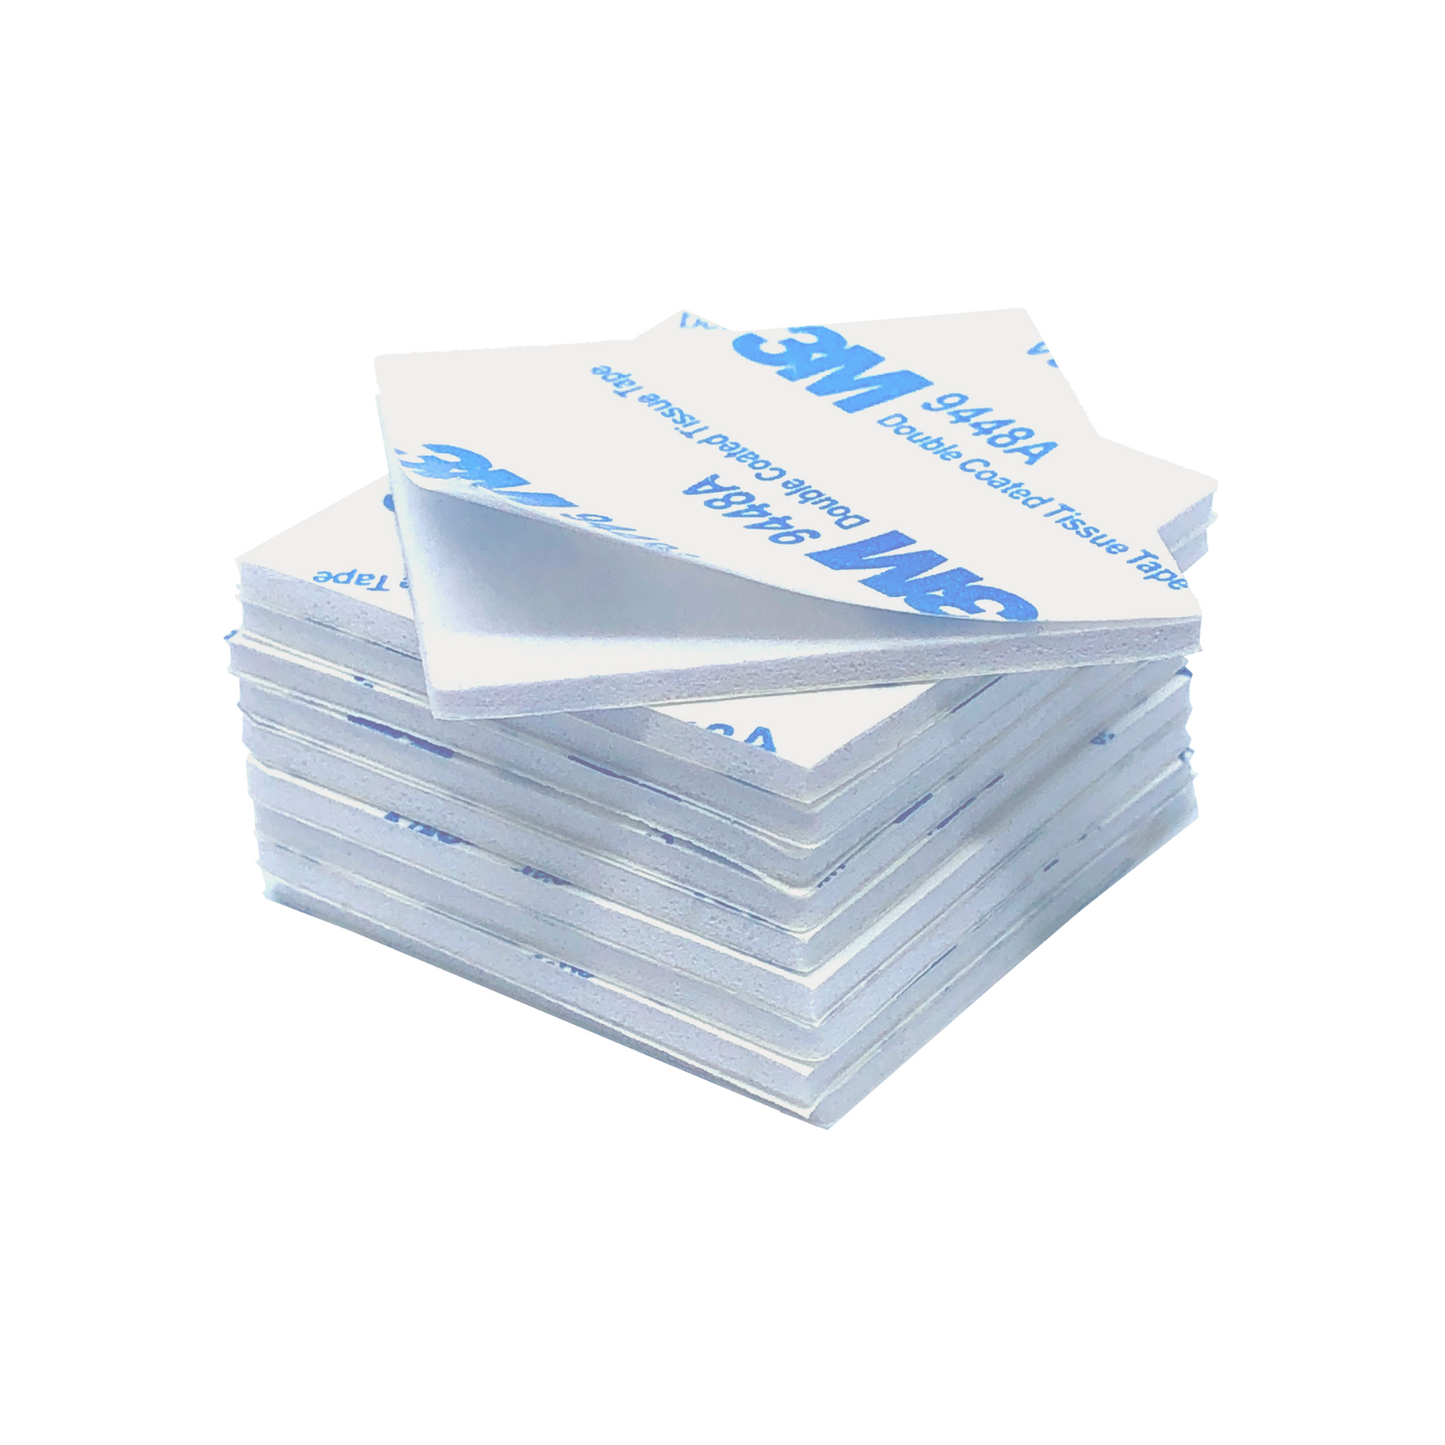 10x 3M double-sided adhesive pads + cleaning wipes + adhesive scraper